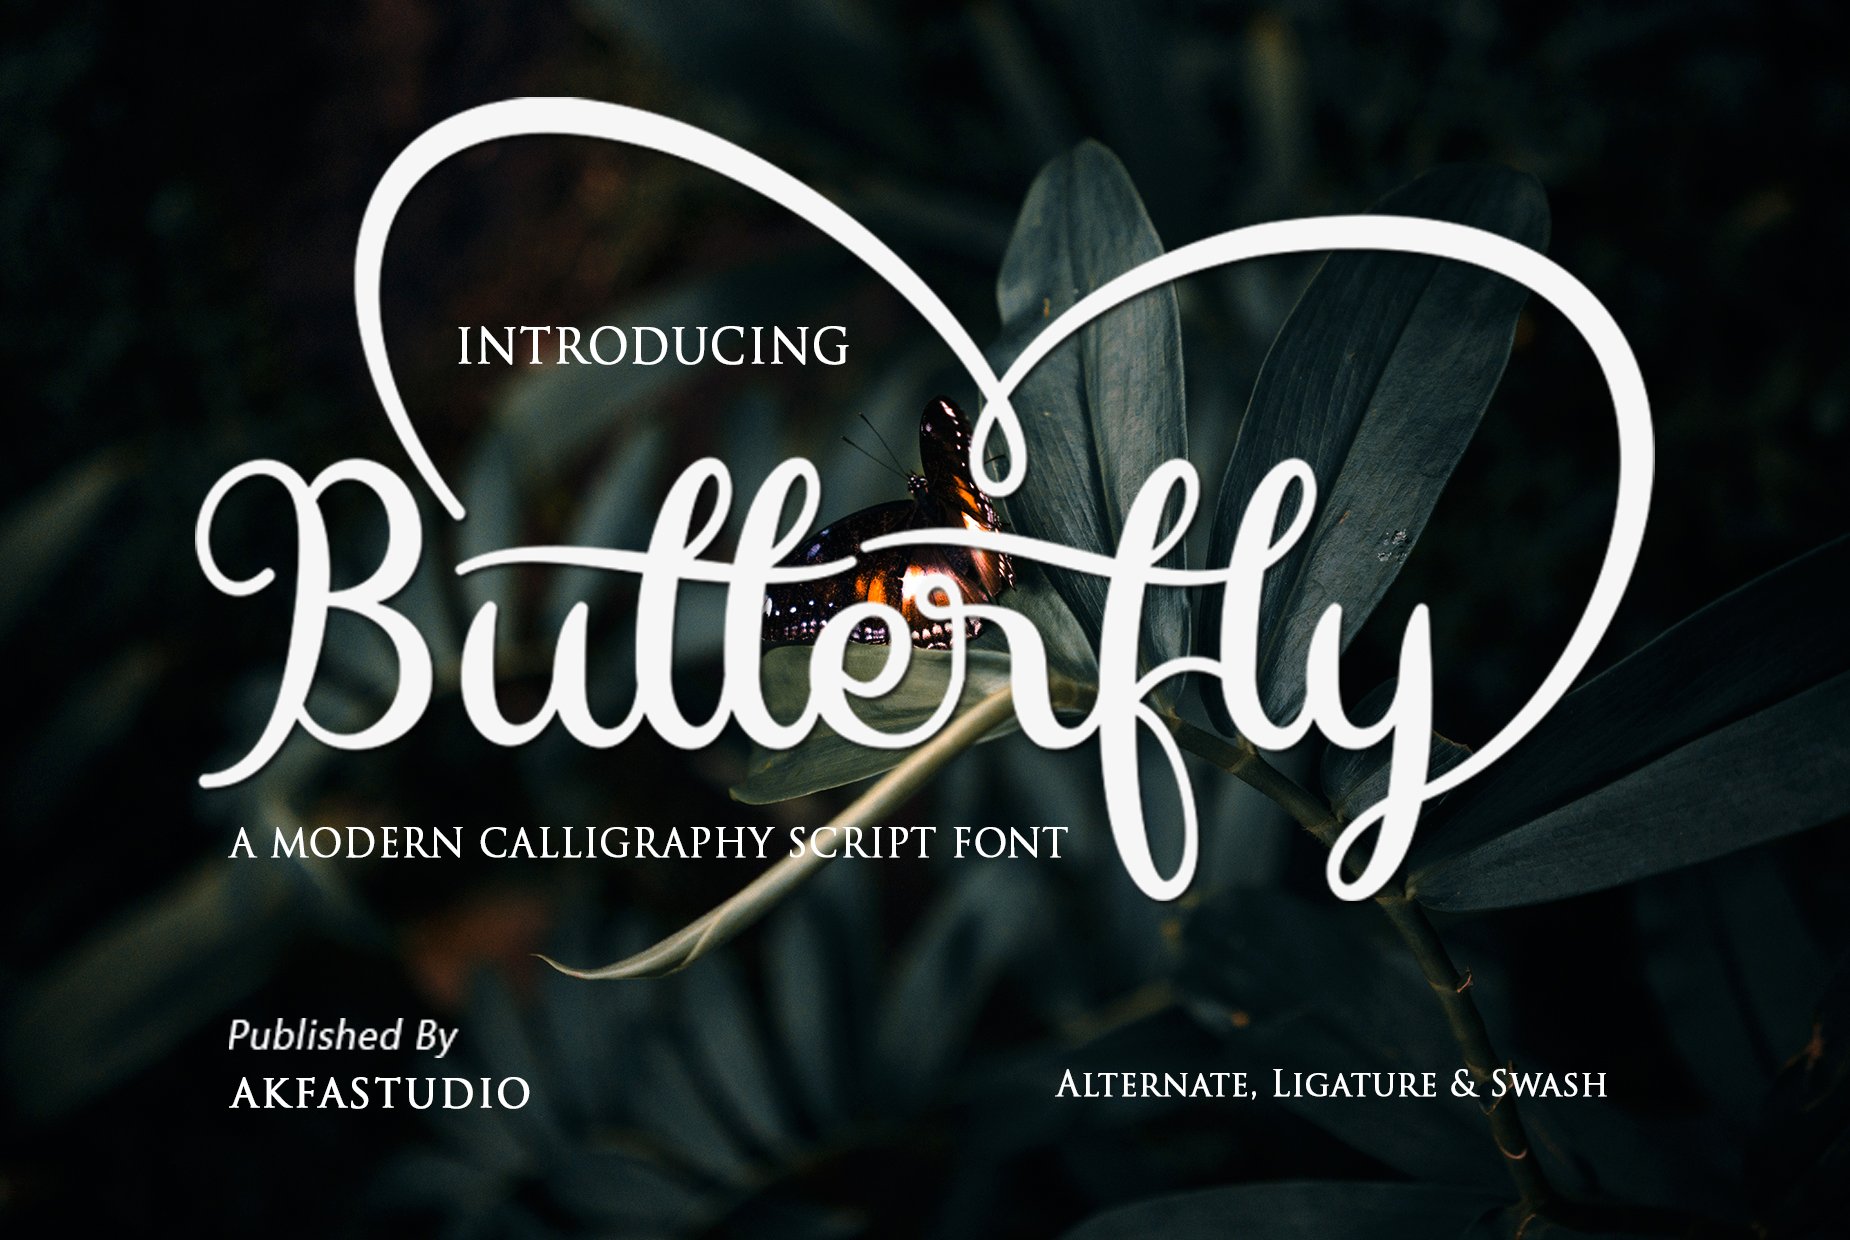 Butterfly Font - Swash Style cover image.